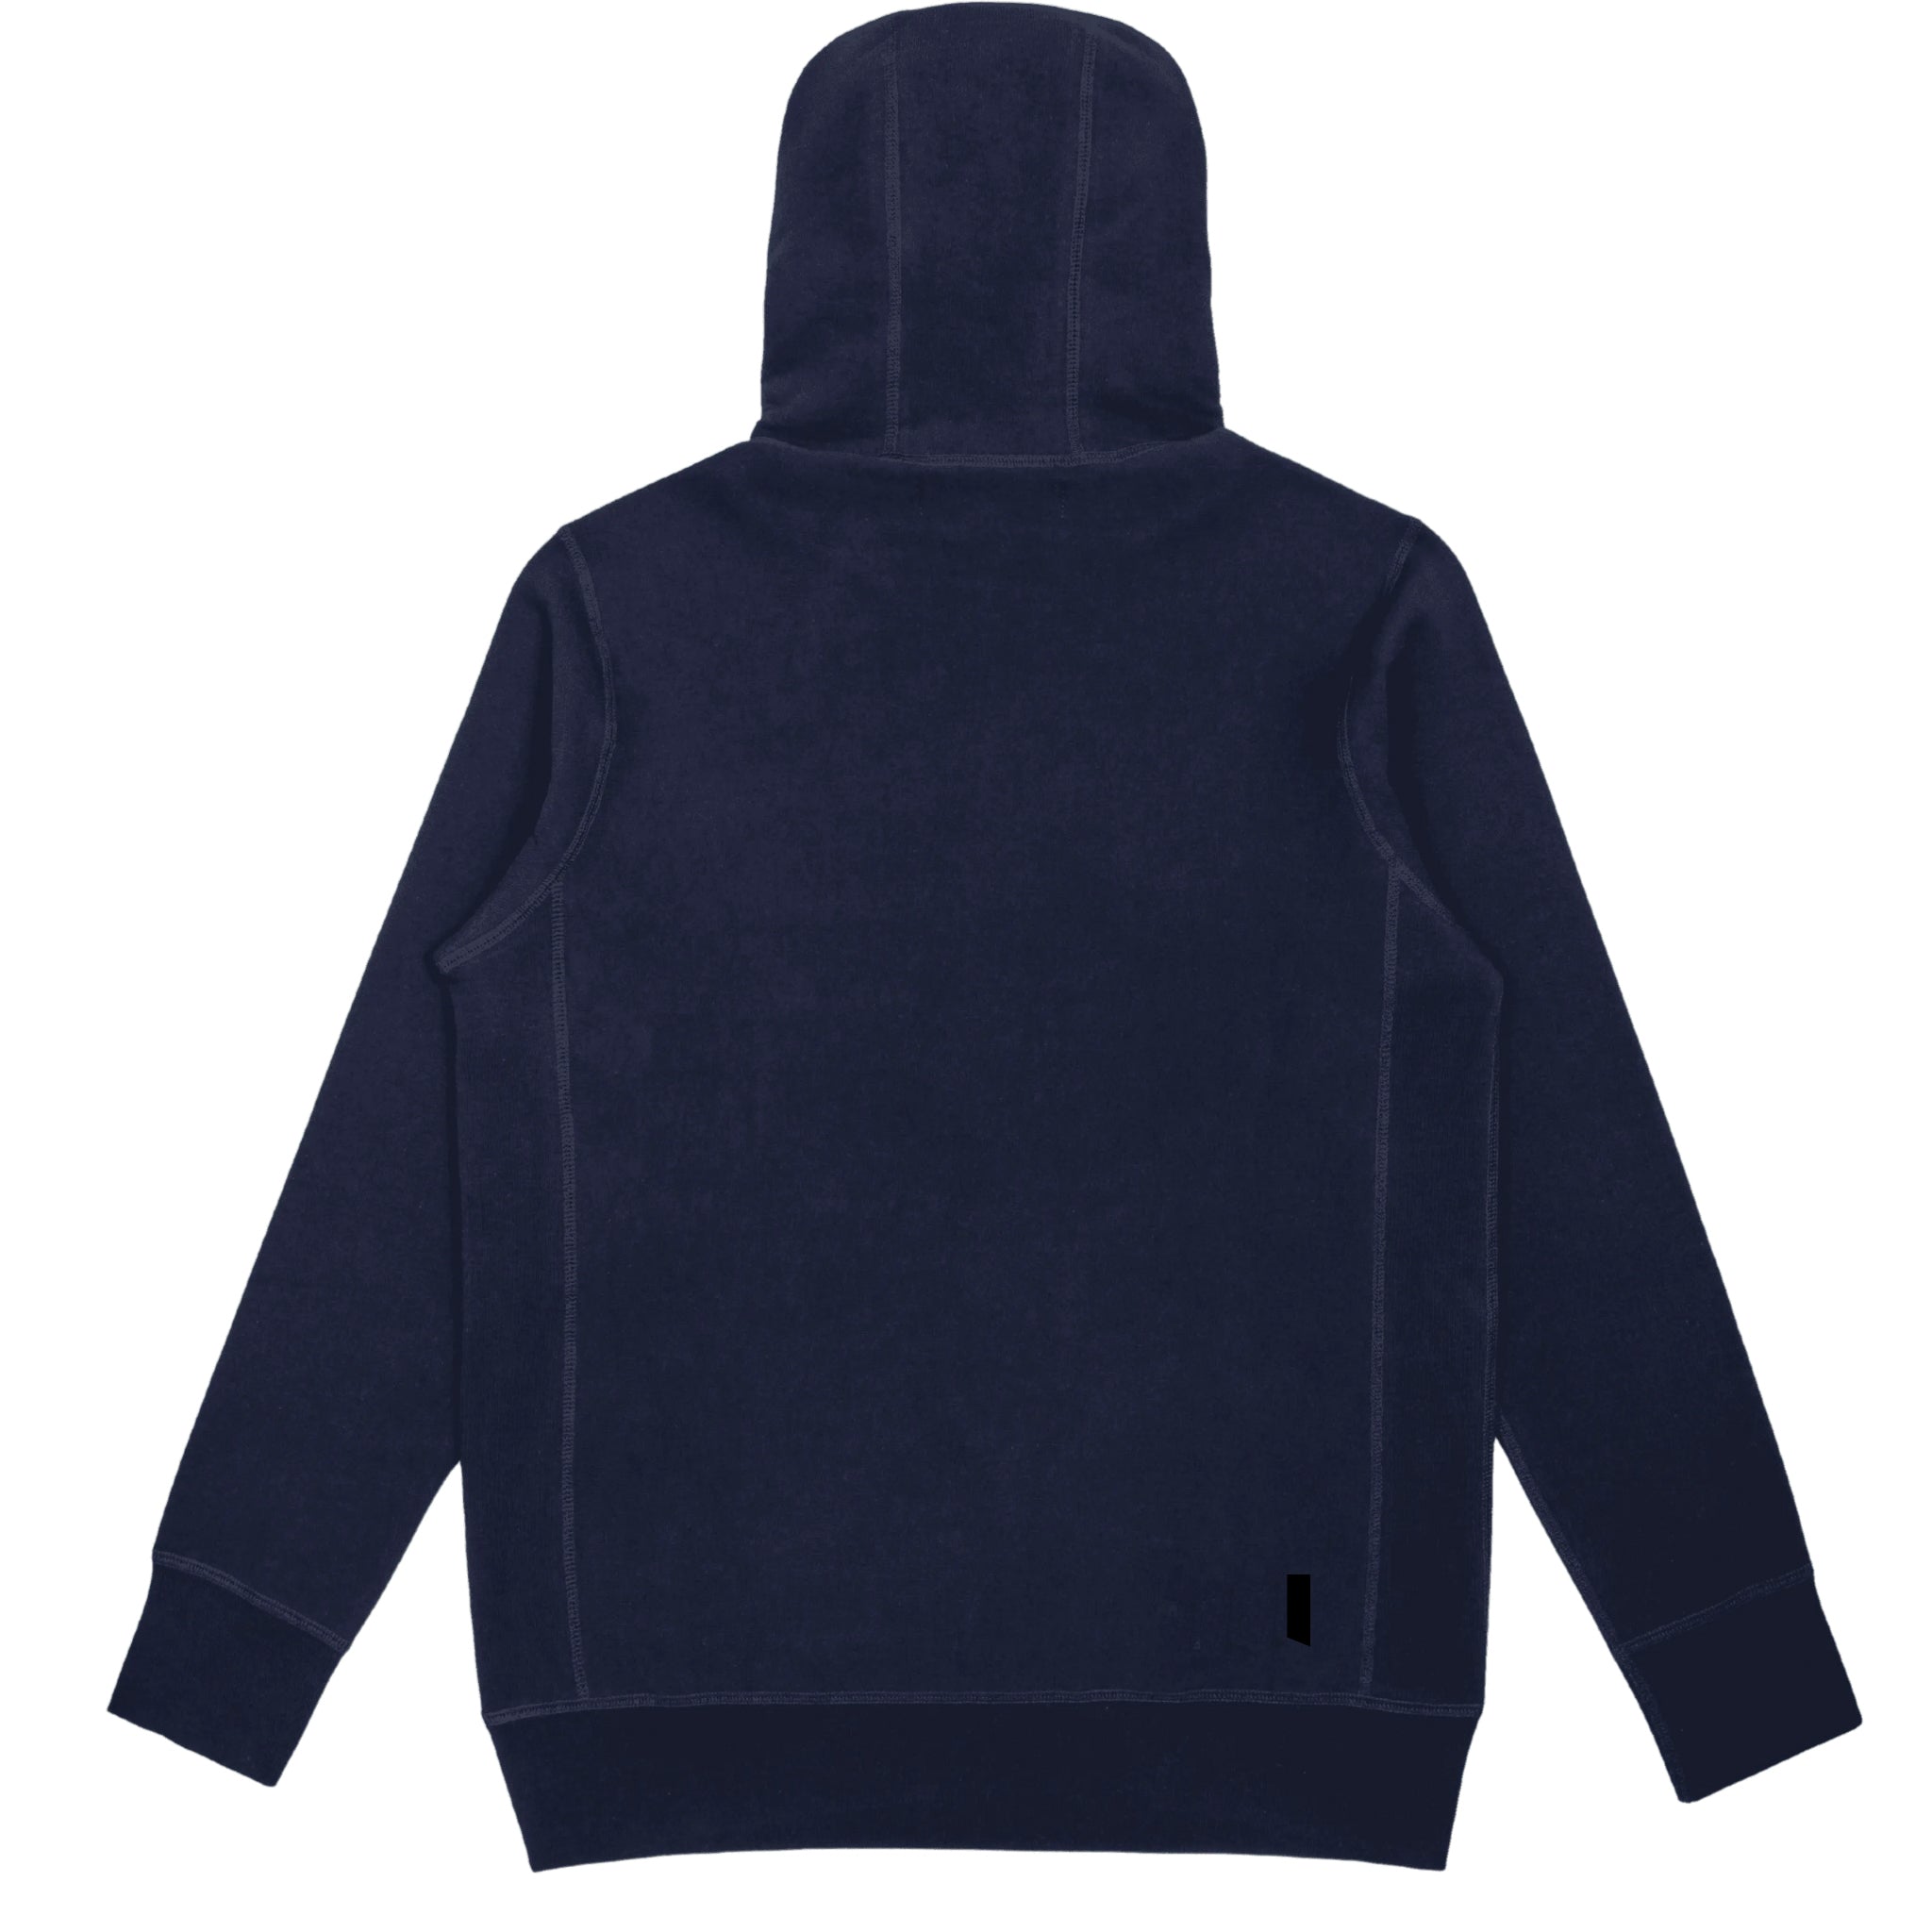 Back view of heavyweight zip hoodie in navy cotton on a white background